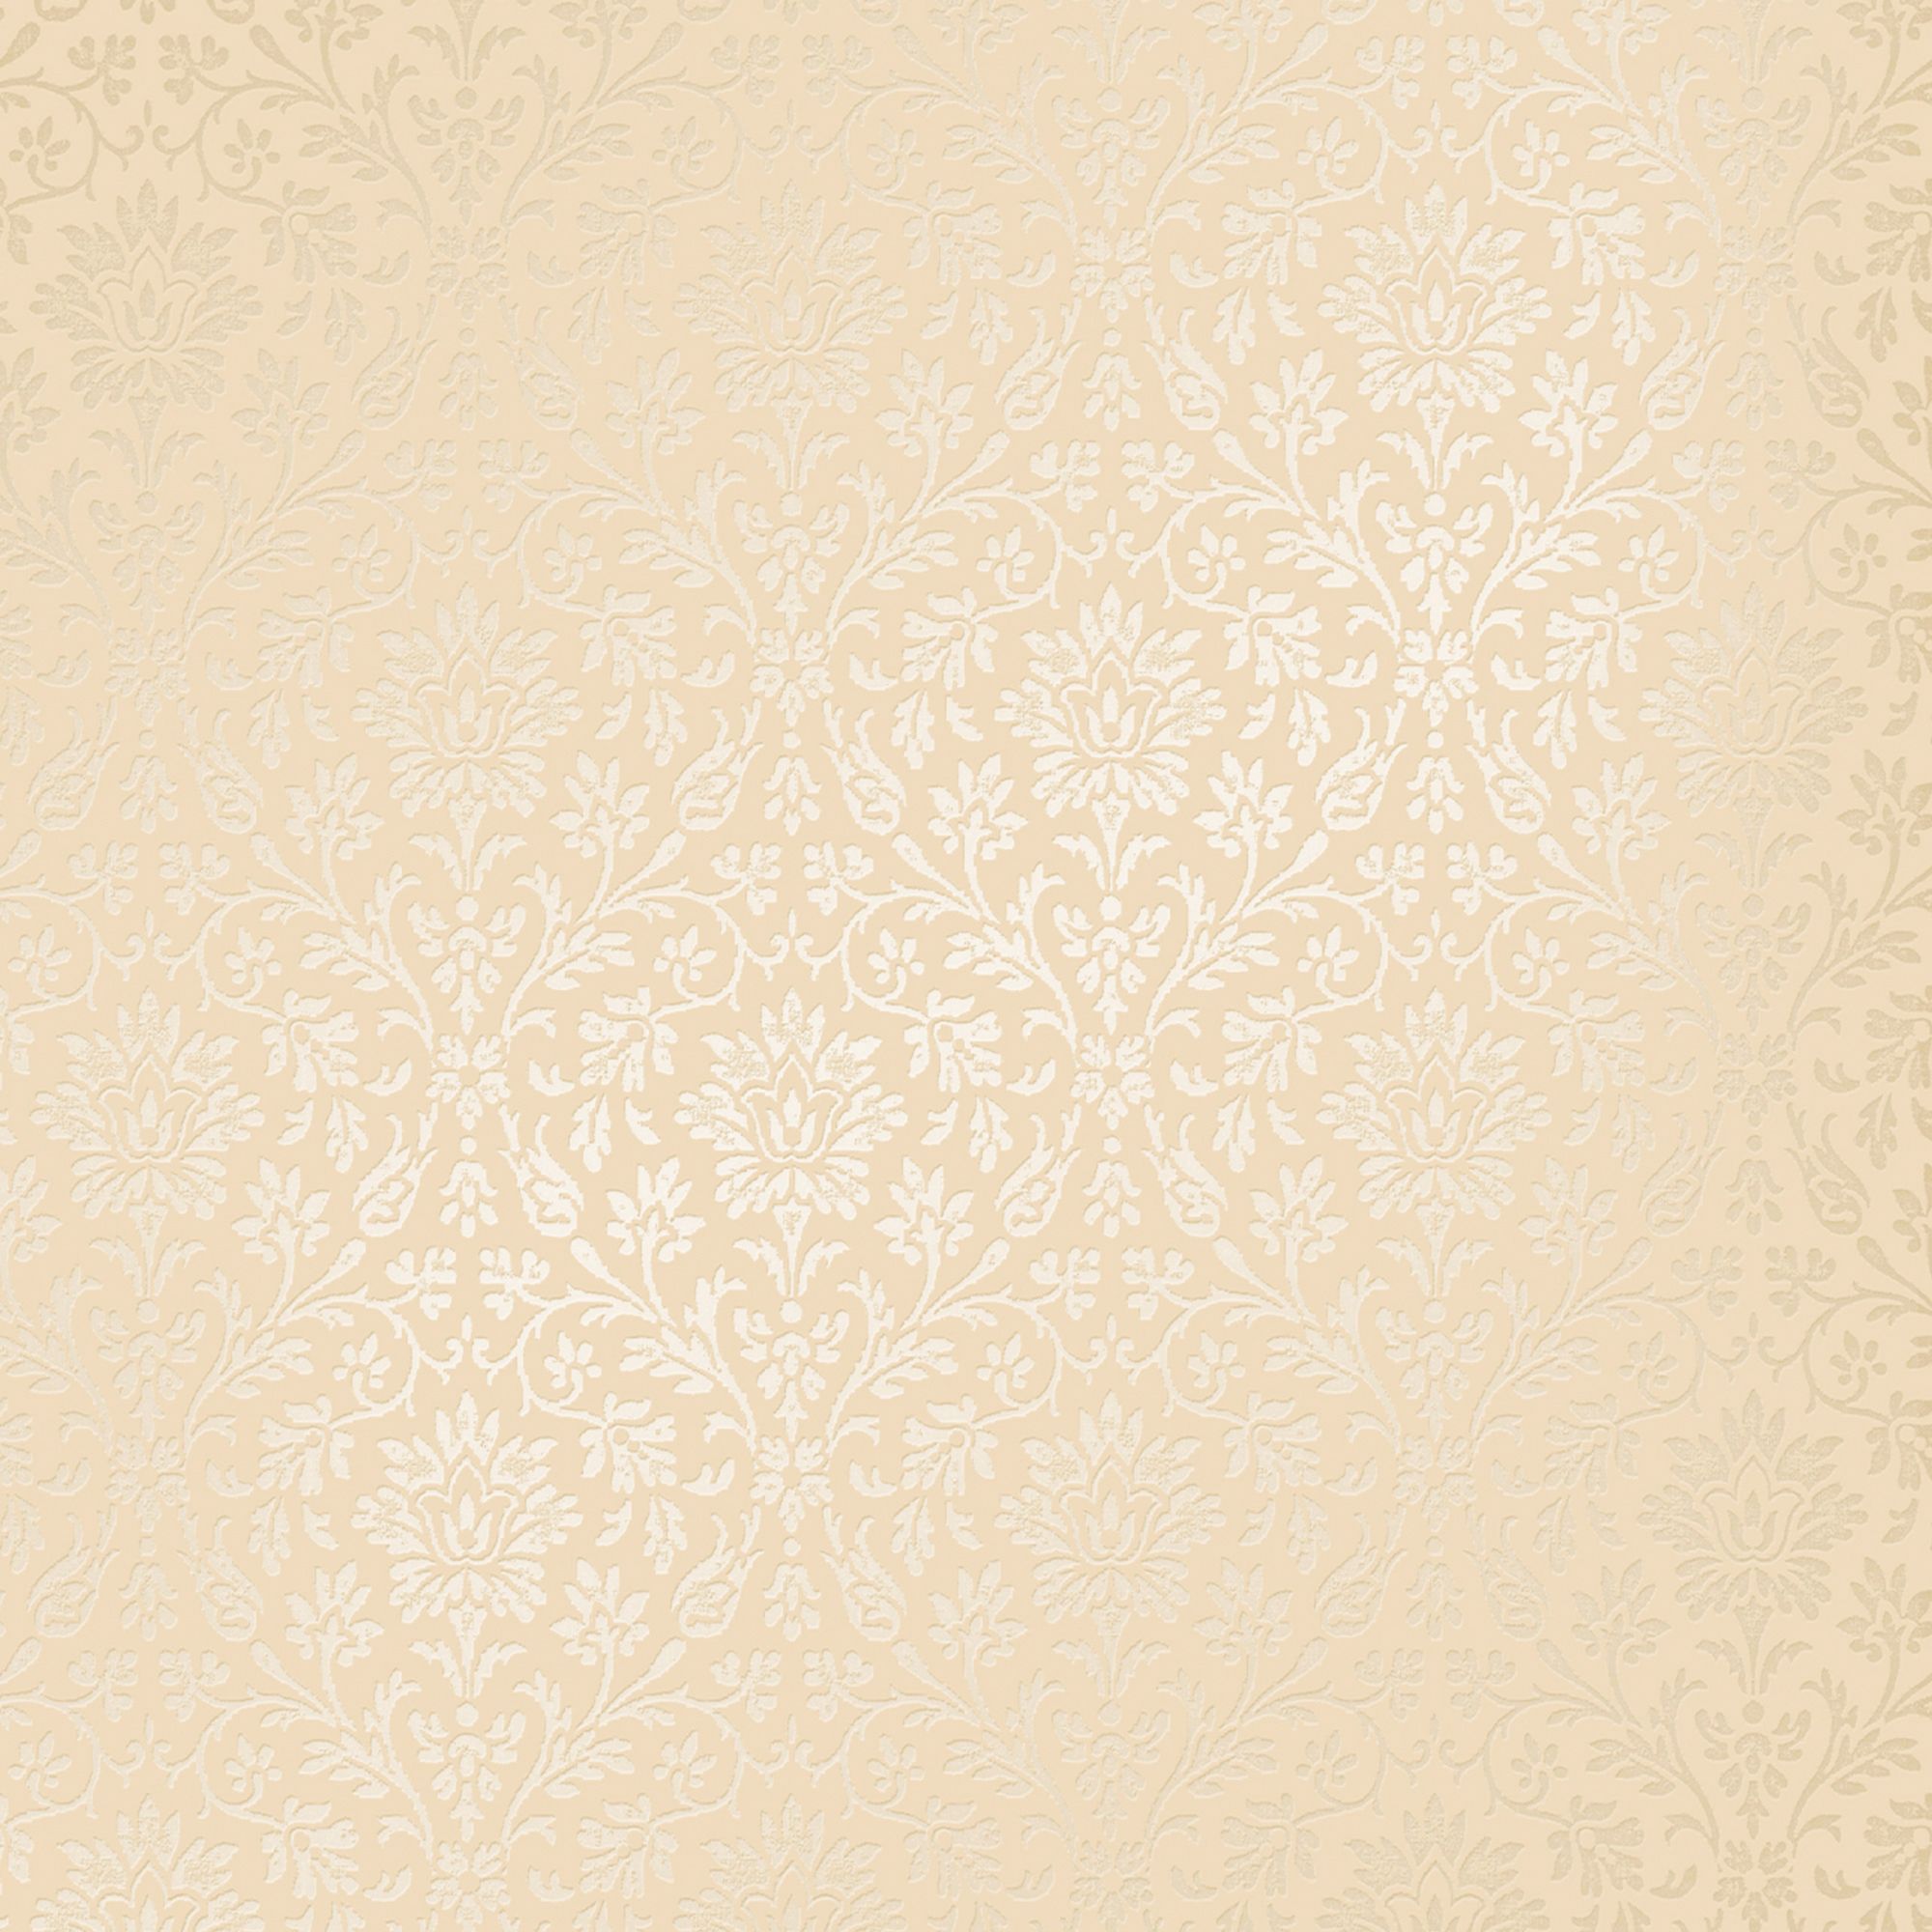 Laura Ashley Annecy Linen Damask Smooth Wallpaper Sample